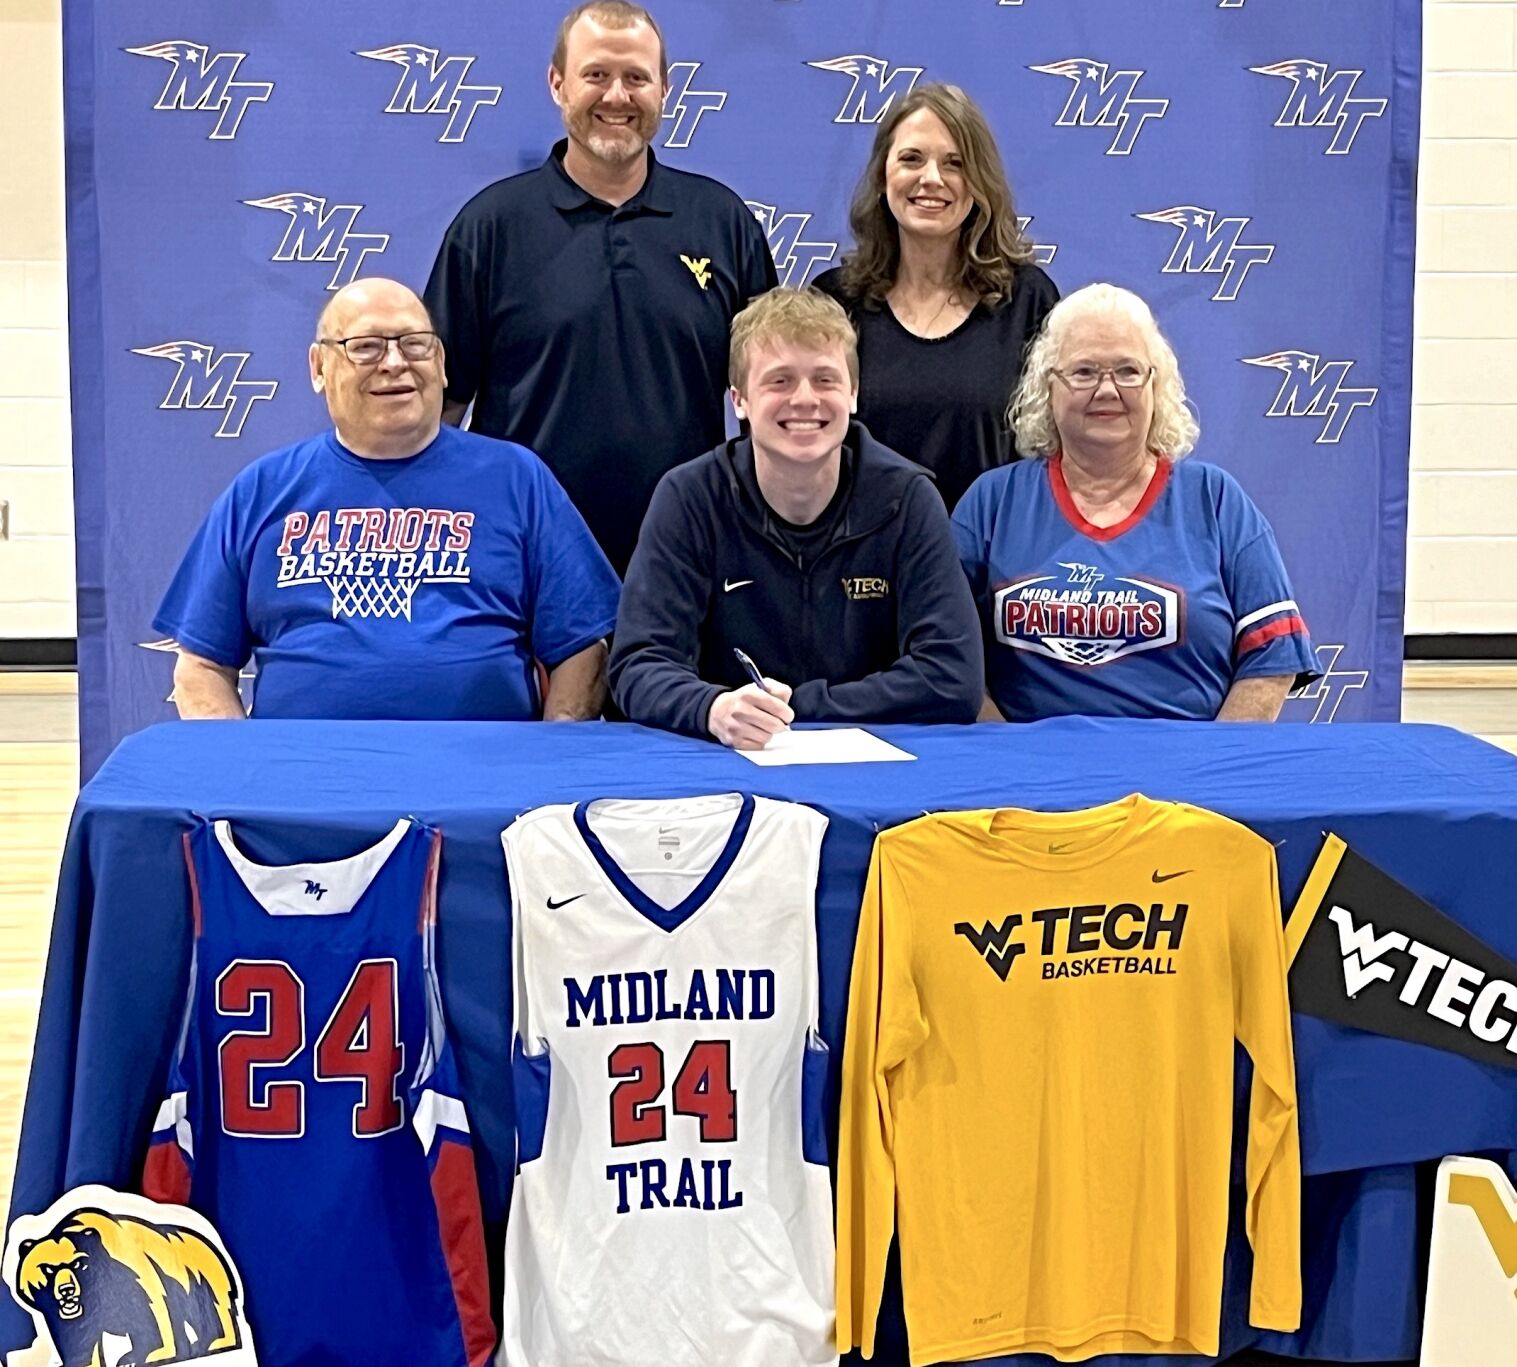 Eli Campbell: Prodigy from Midland Trail High School Joins WVU Tech Basketball Team